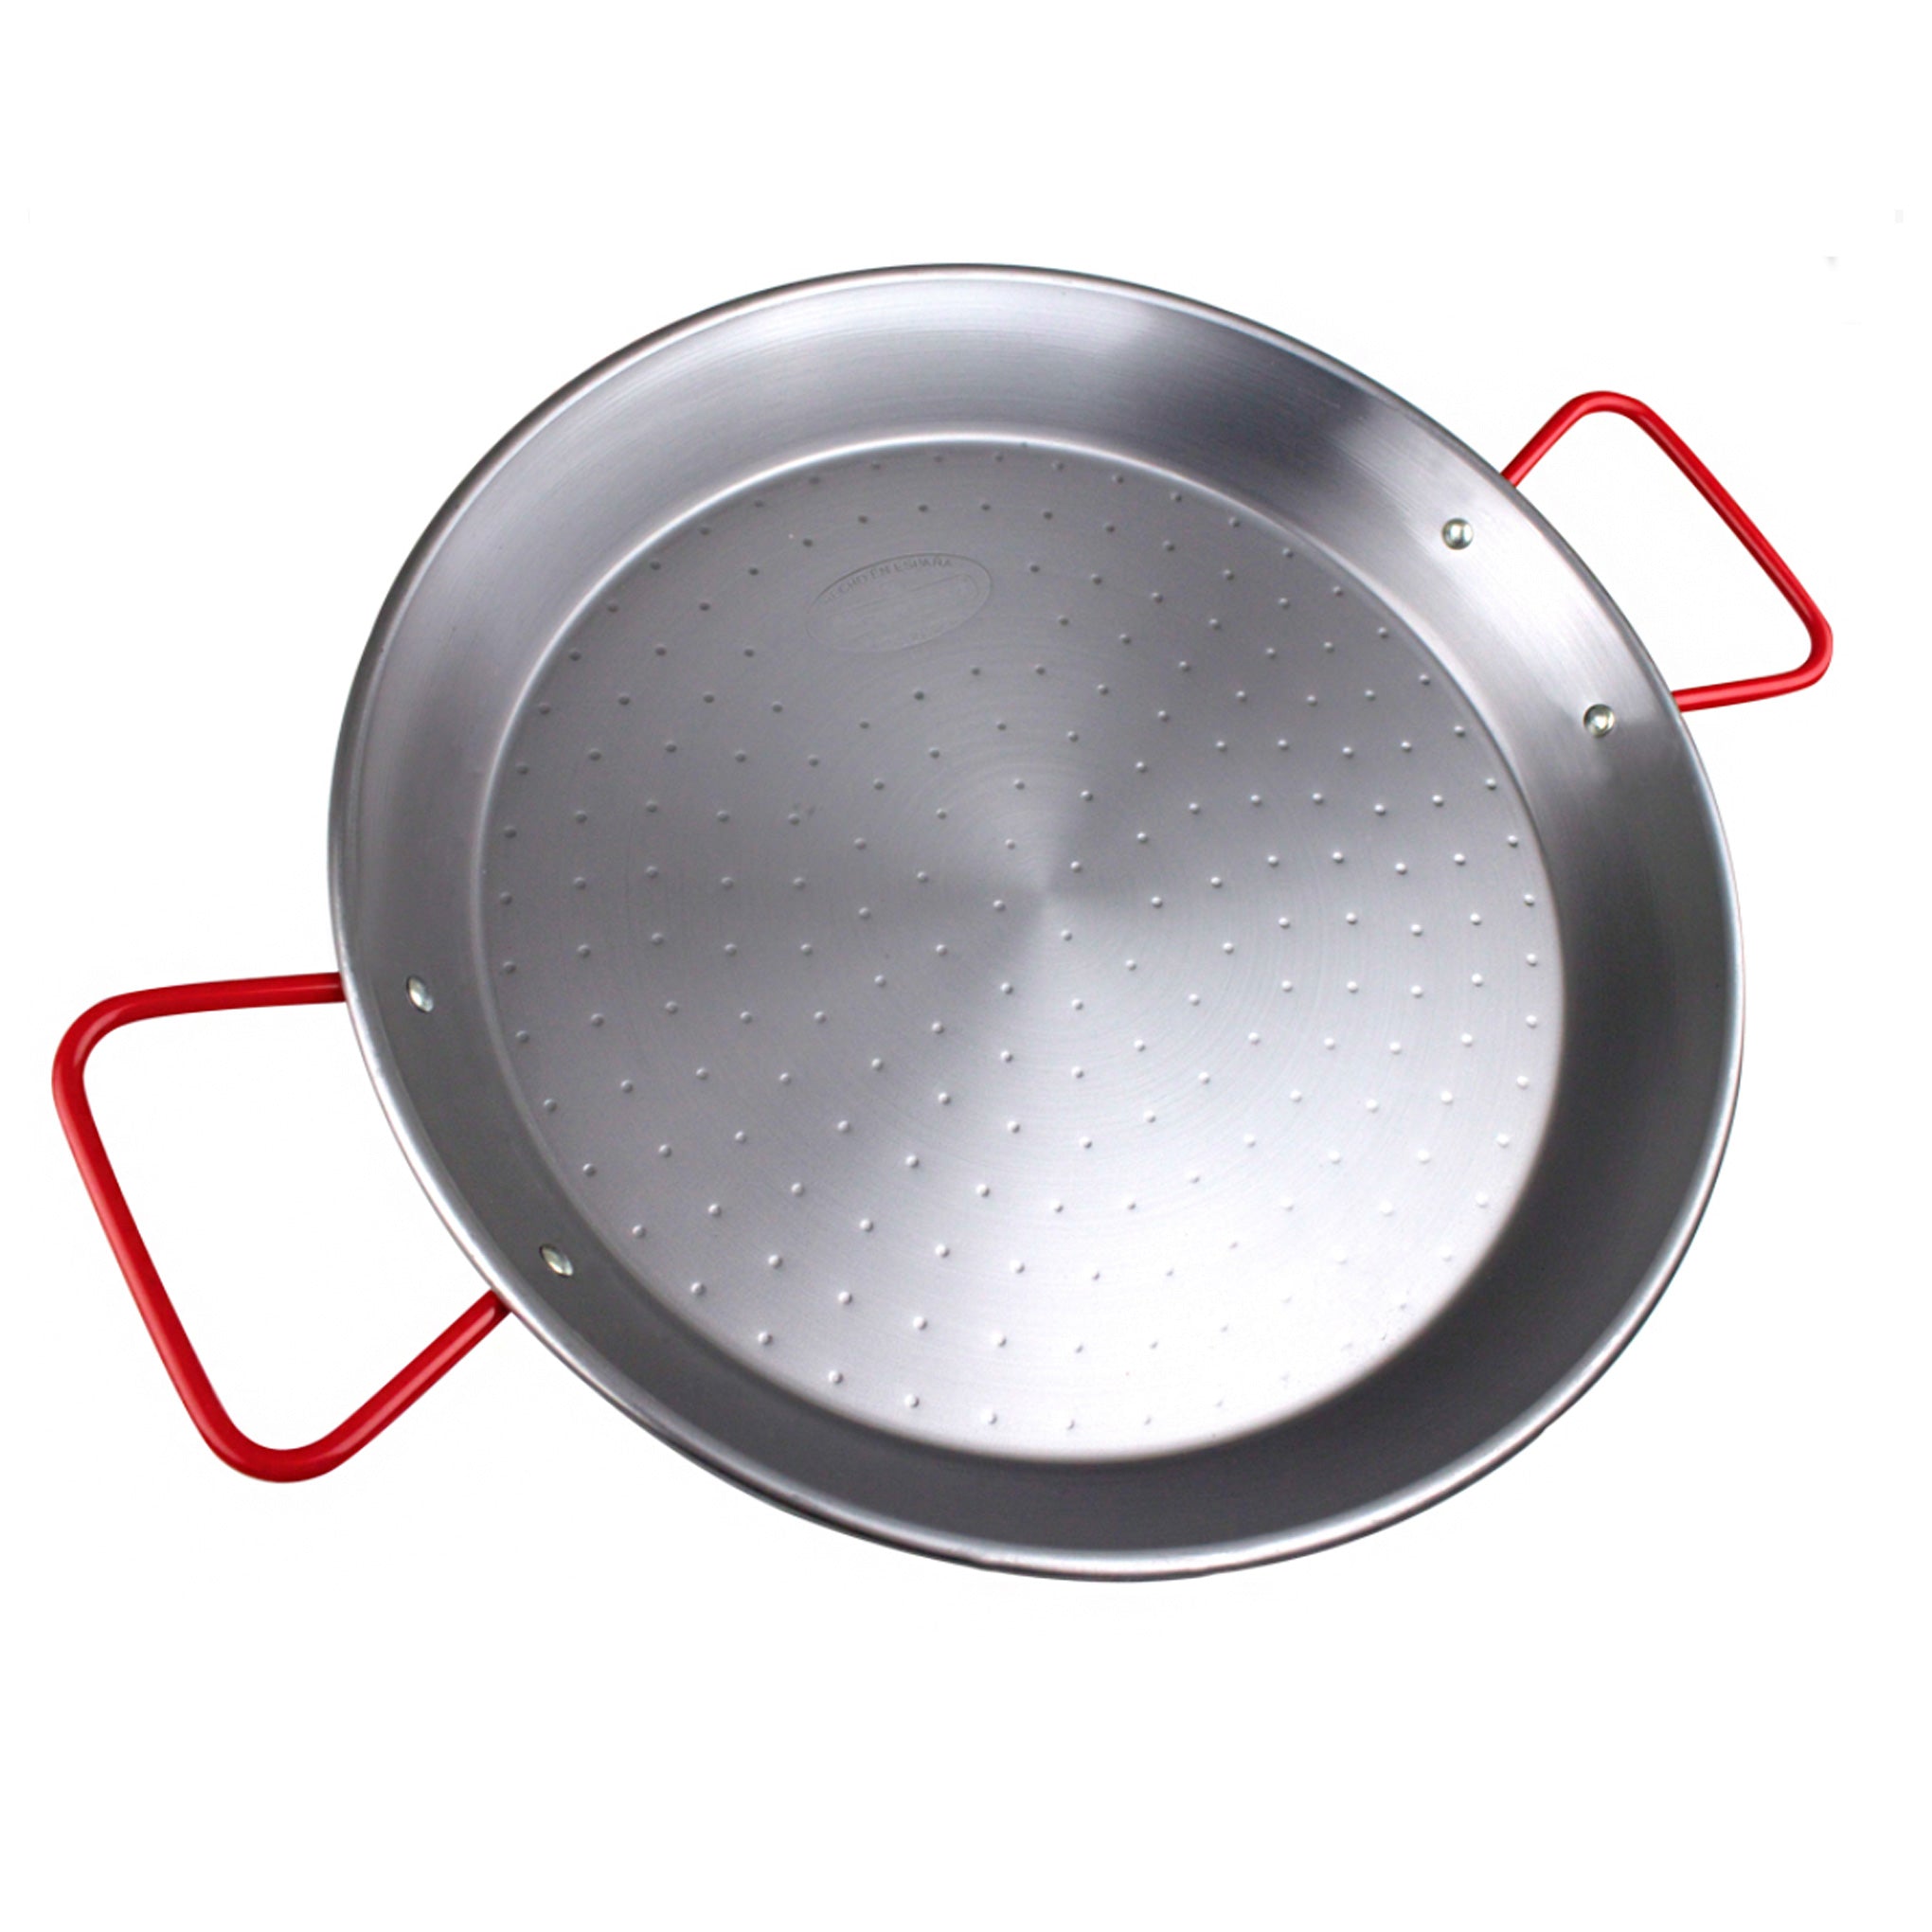 MAGEFESA® Carbon - paella pan 15 in - 38 cm for 8 Servings, made in Carbon  Steel, with dimples for greater resistance and lightness, ideal for cooking